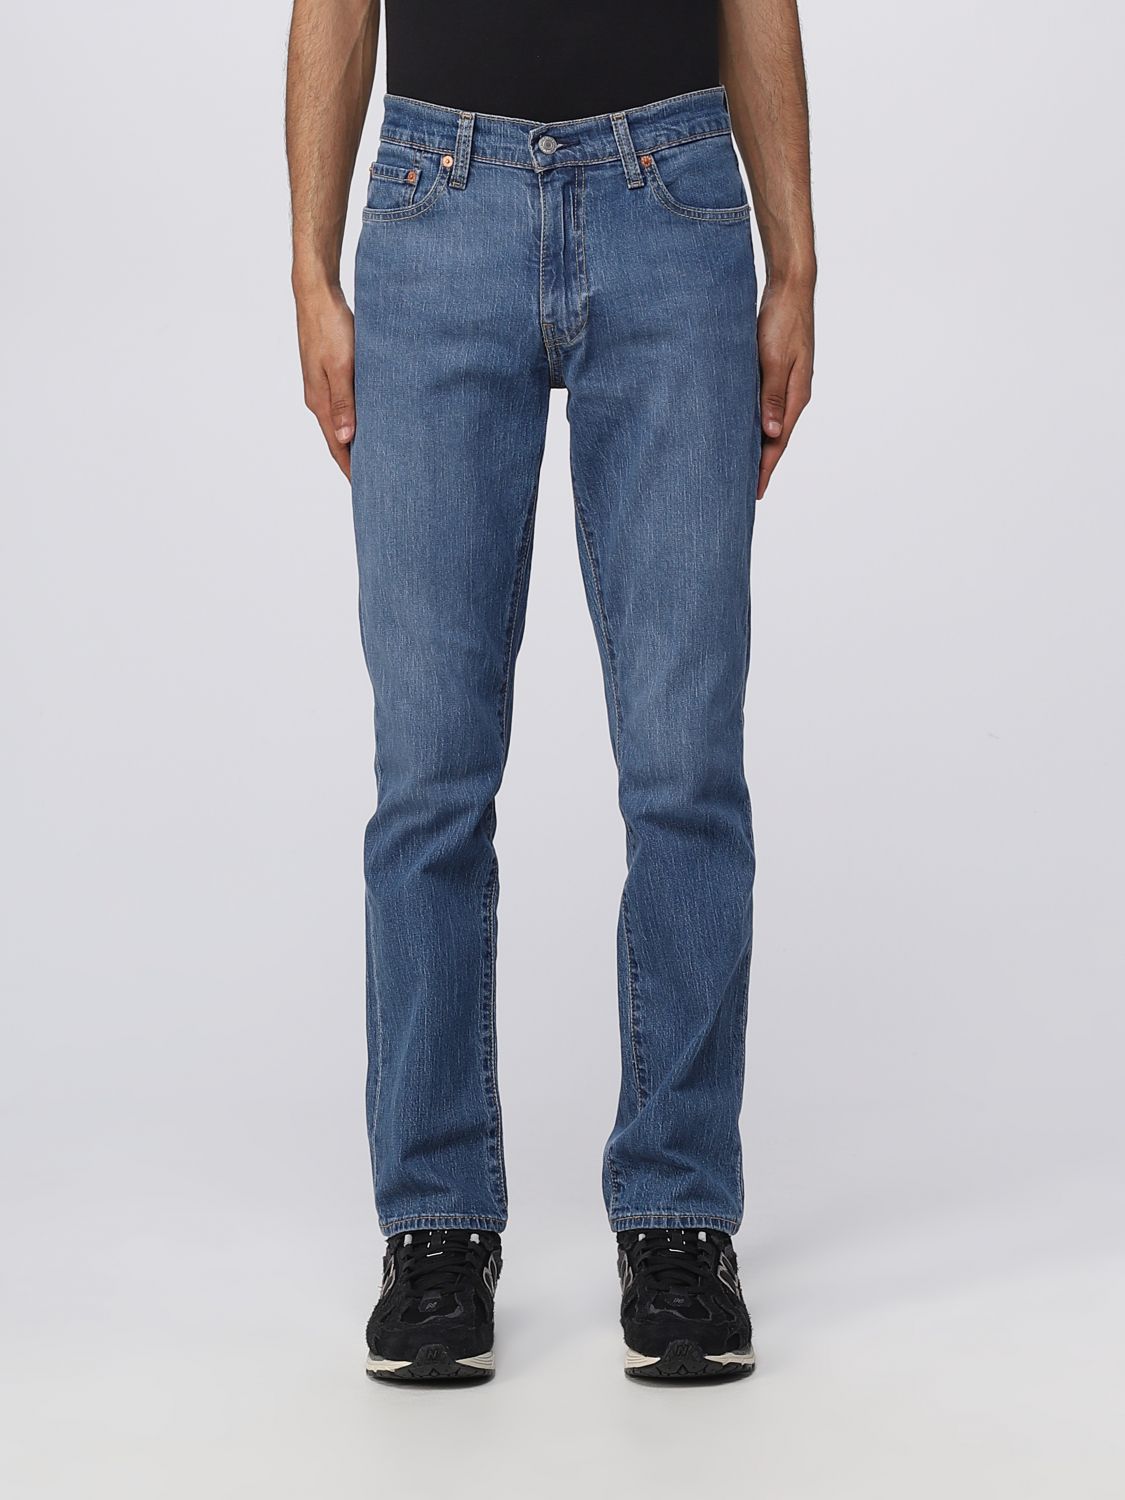 LEVI'S: pants for man - Blue | Levi's pants 045115461 online on GIGLIO.COM